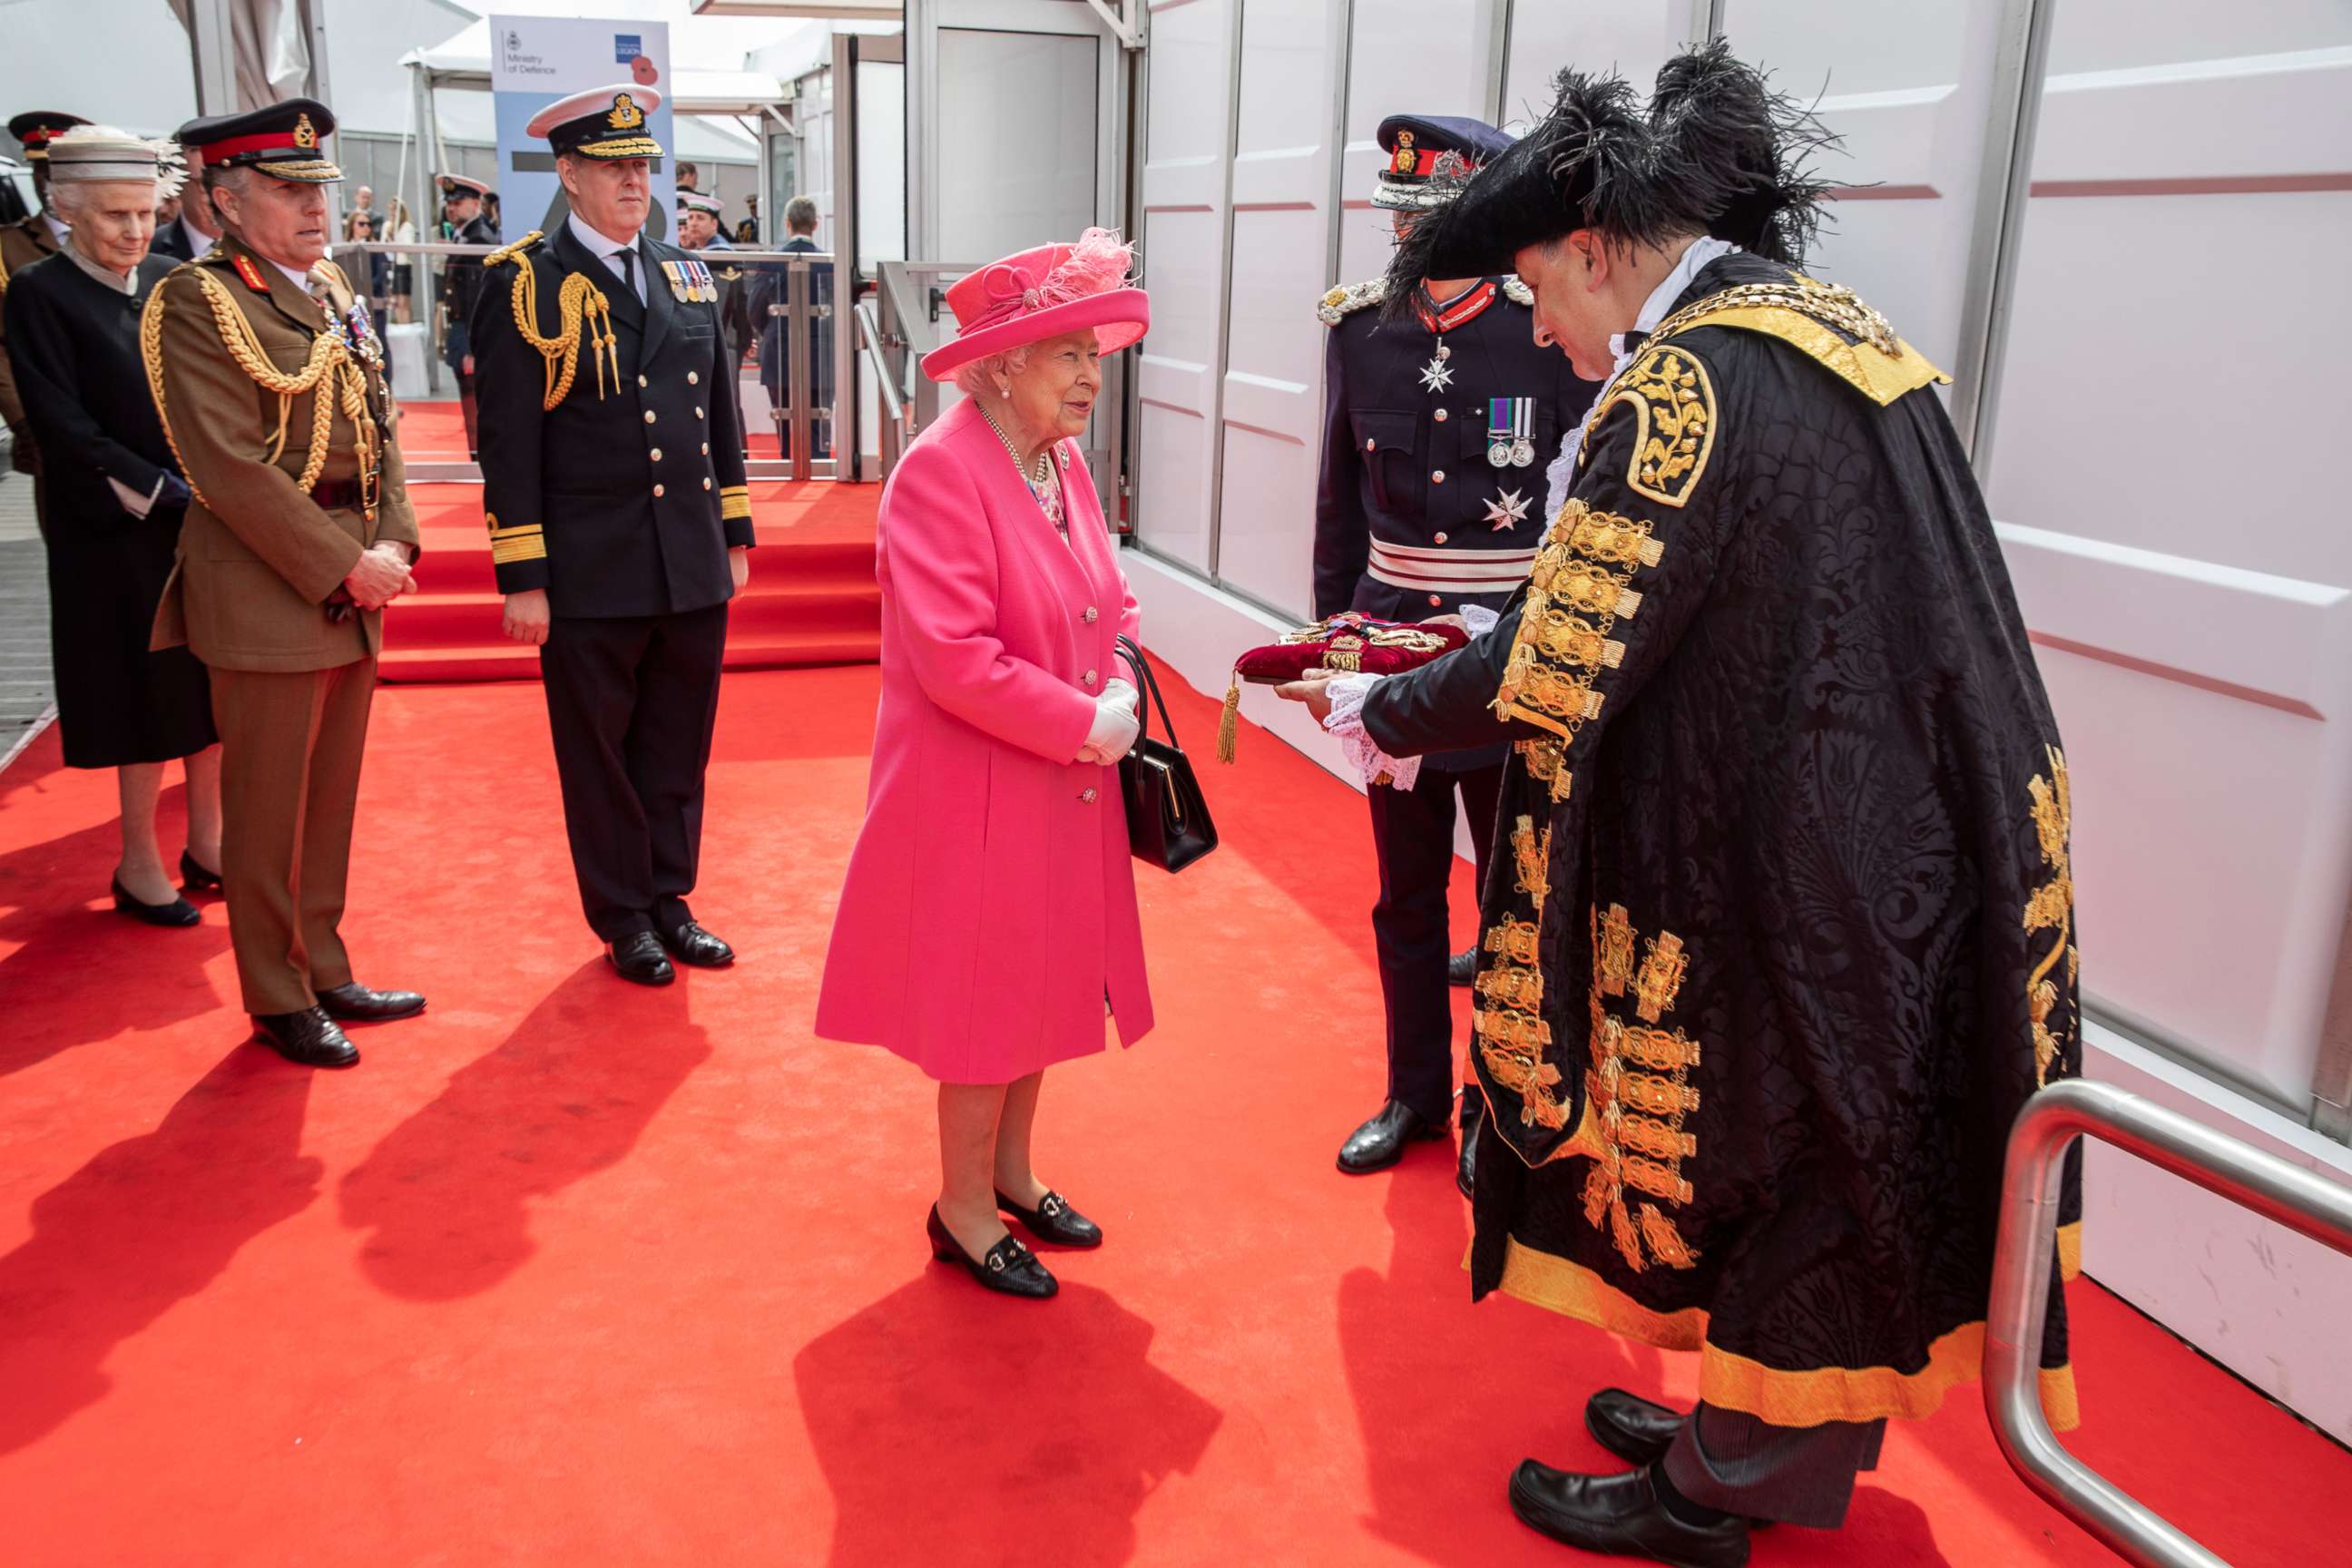 PHOTO: Queen Elizabeth II is presented to the Keys of Portsmouth by the Mayor ahead of the National Commemorative Event commemorating the 75th anniversary of the D-Day invasion on June 5, 2019 in Portsmouth, England.